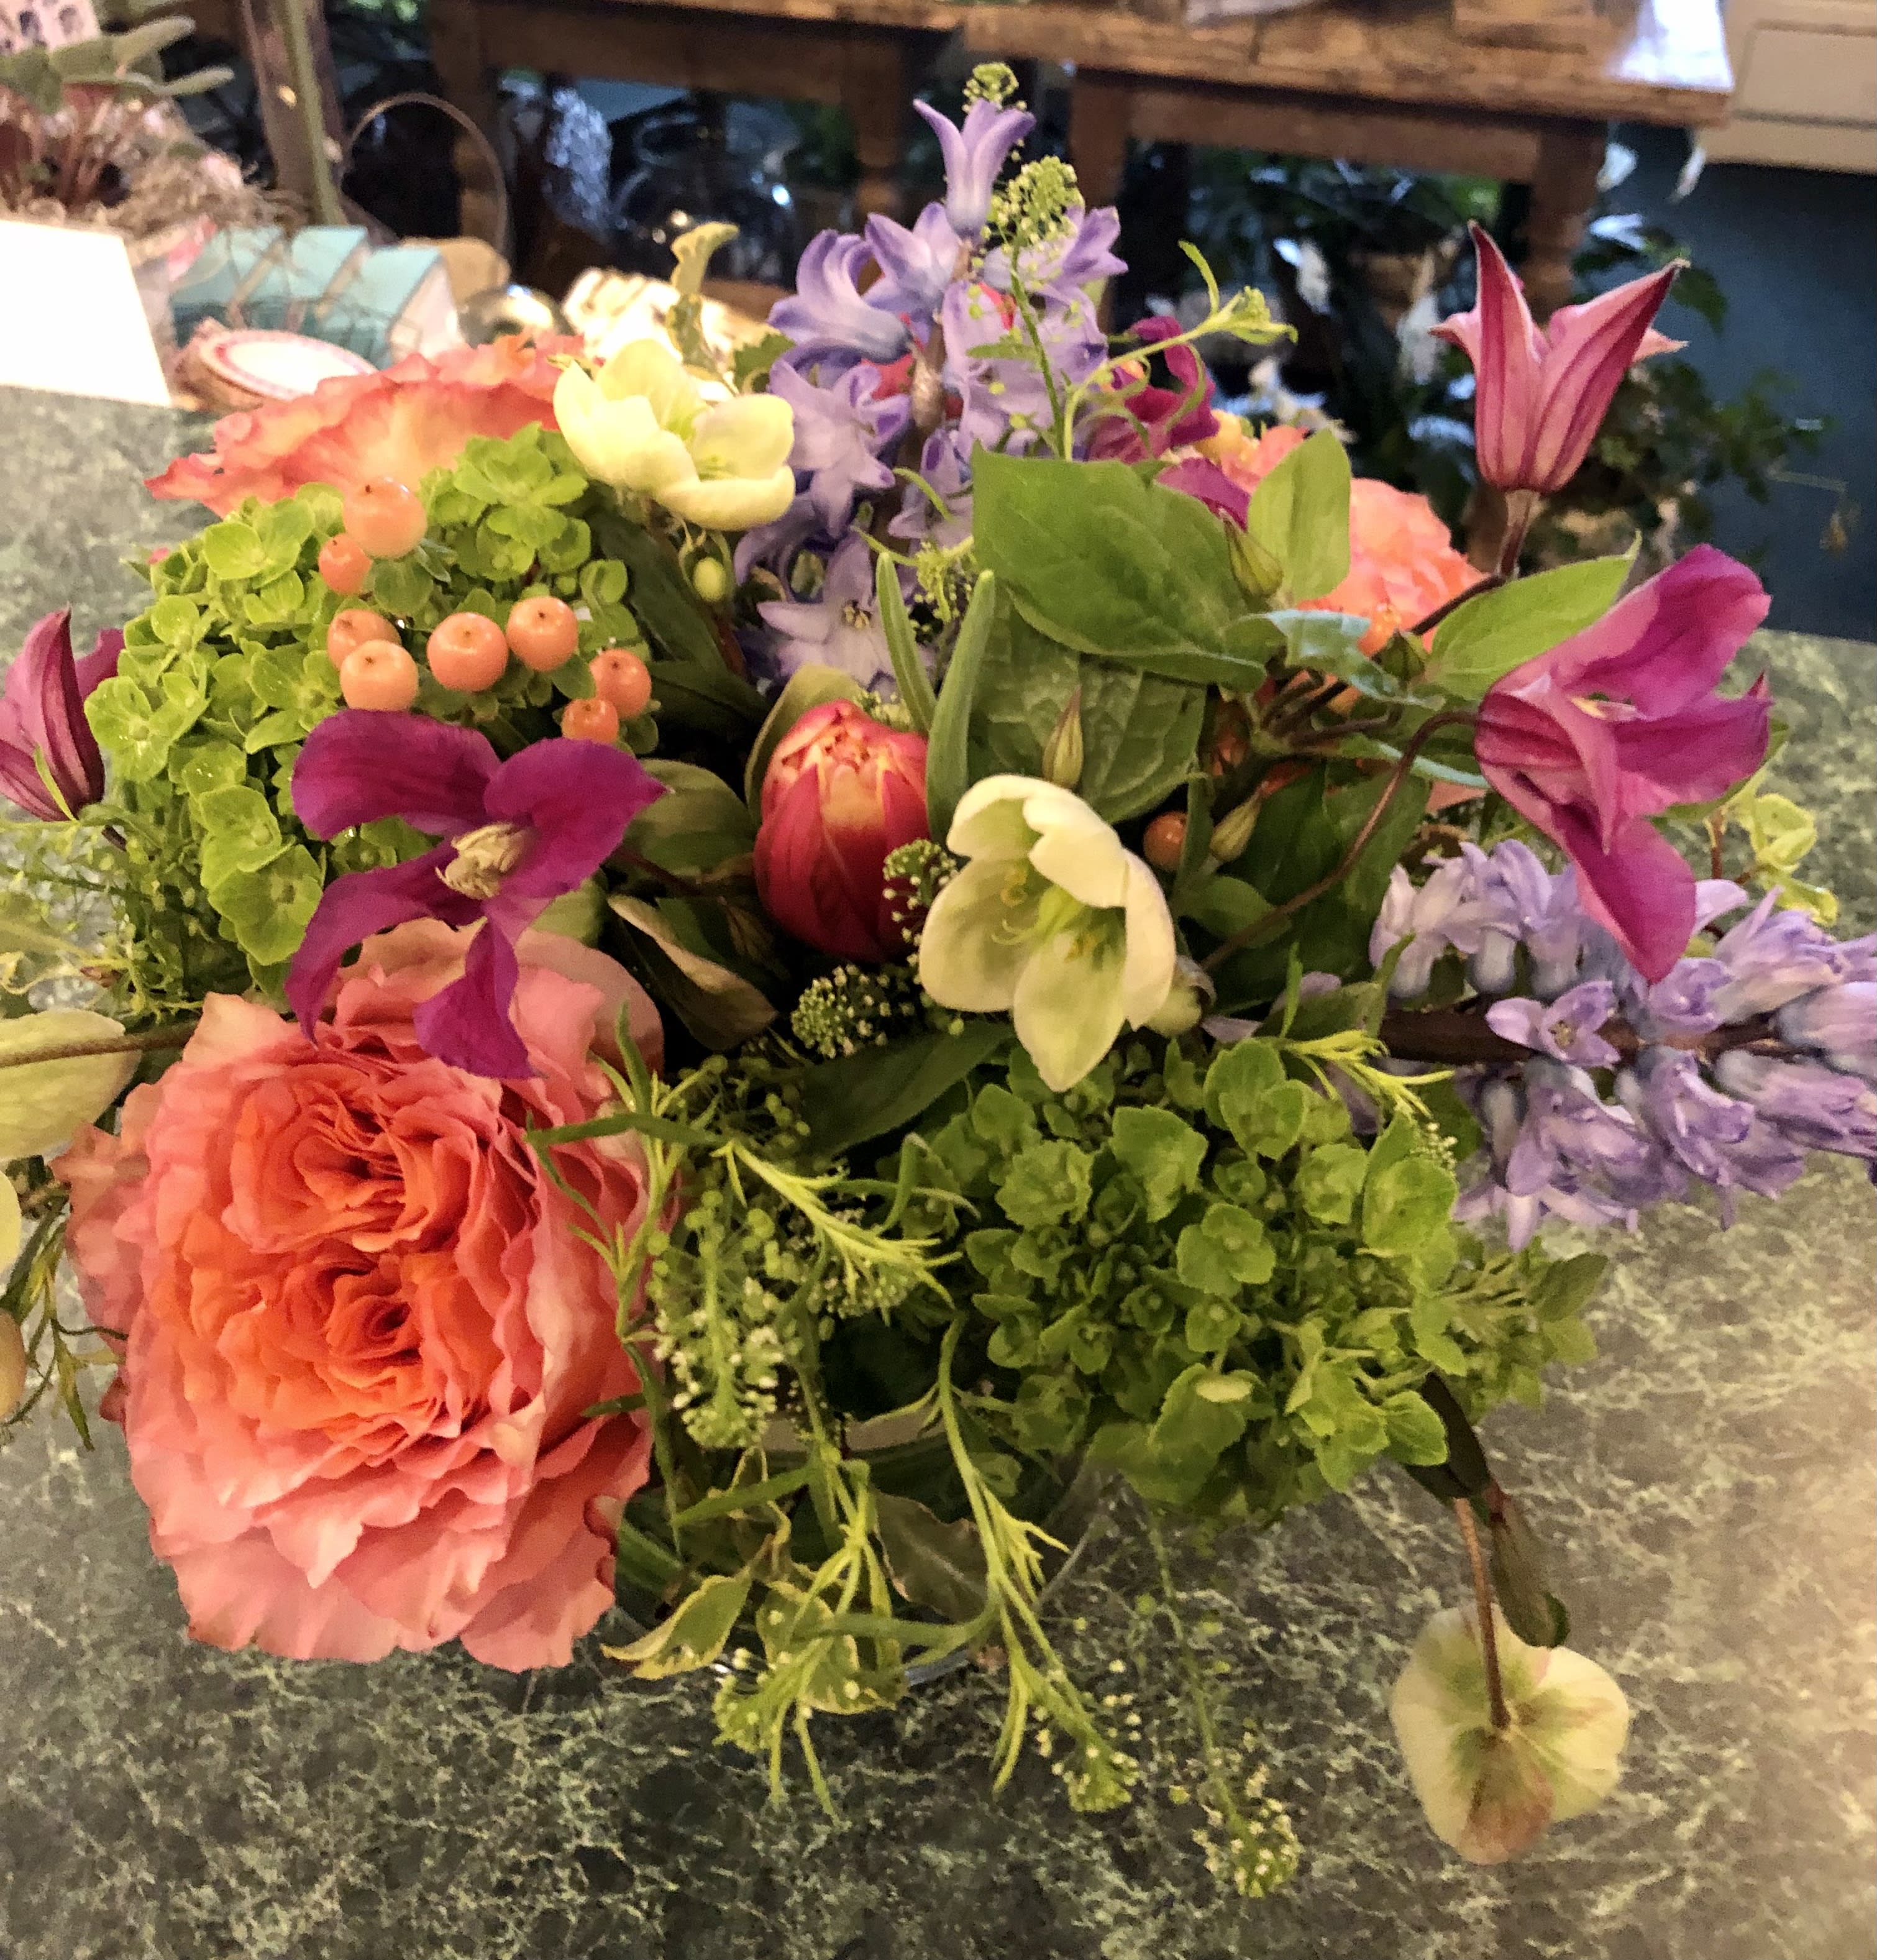 Free Spirit Spring Cylinder - Mix of Free Spirit roses, green hydrangea, hellebores, blue hyacinths, Columbus tulips, peach hypericum and Kiev clematis in 5x5 cylinder vase leaf lined with lepidium and  variegated mini pittisporum.